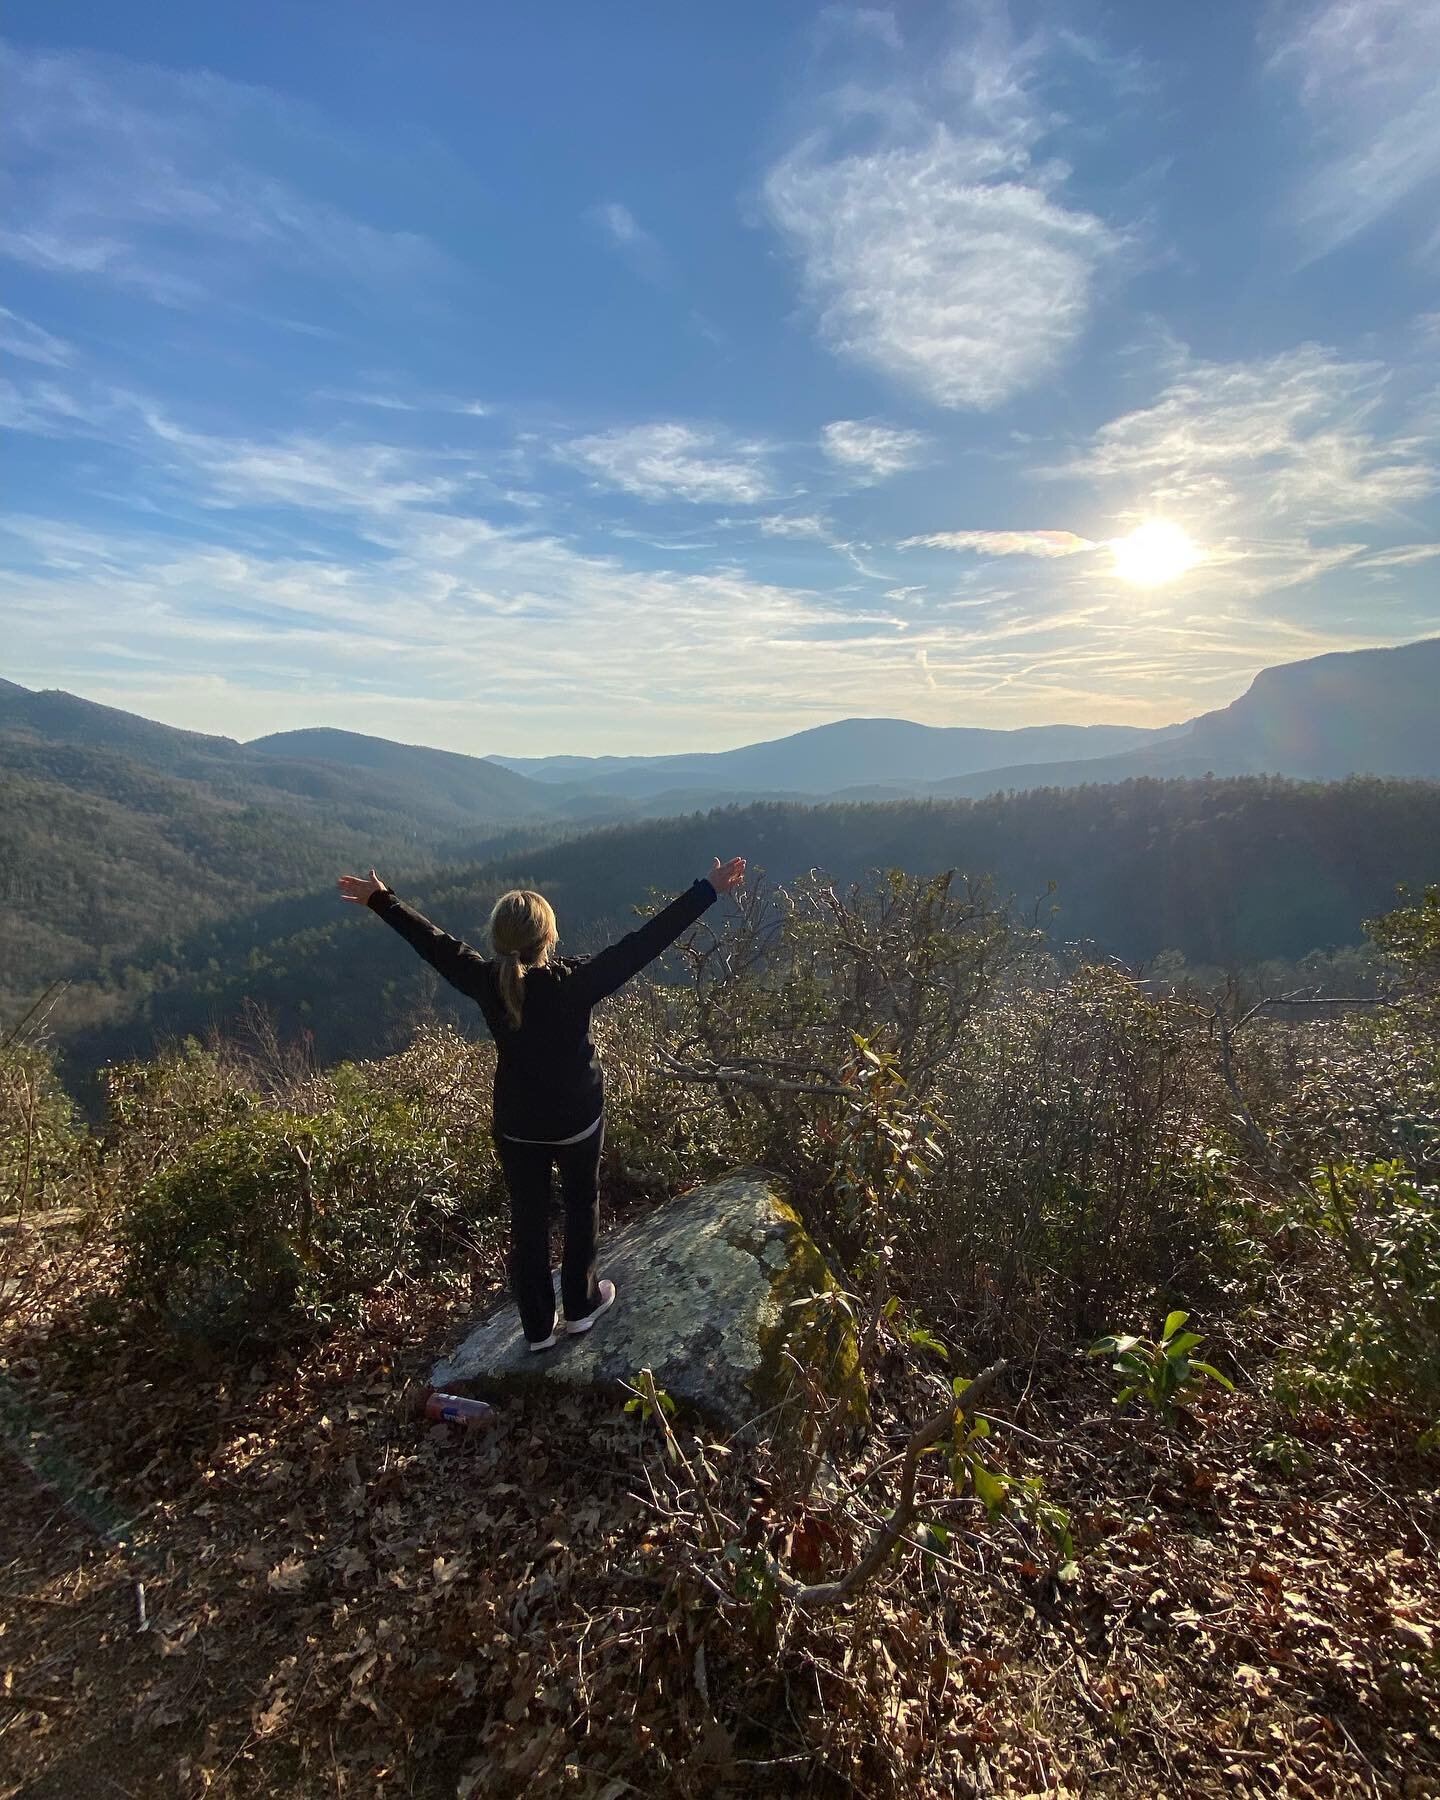 12 Days in Cashiers, NC, and we've been blessed with mountains of inspiration. ❤️ So thankful for this time of rest, reflection, and rejuvenation. Now, it's full speed ahead with what God is calling us to do with this TV show, glorifying Him!❤️ #neve